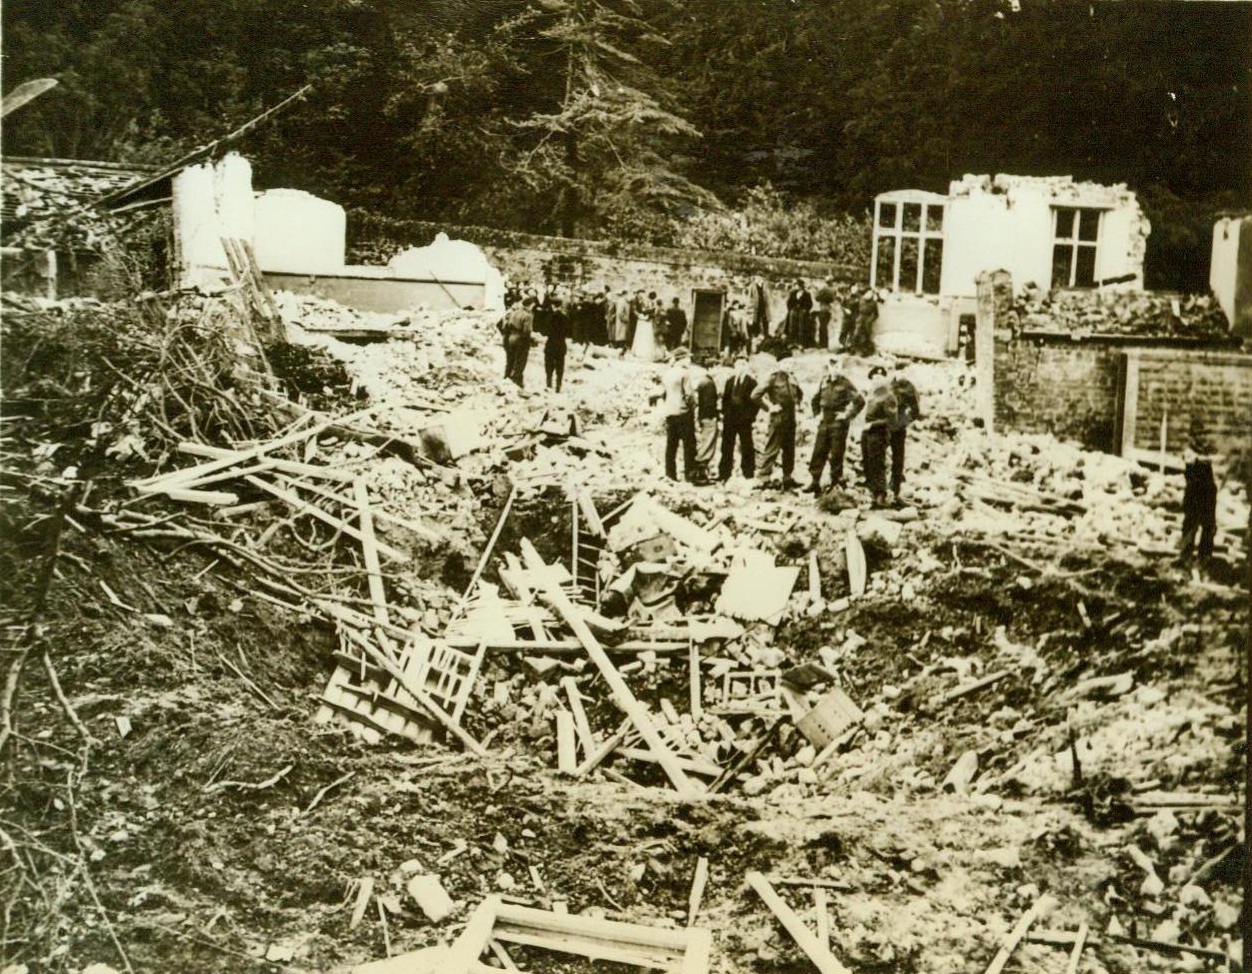 Death in the afternoon, 10/9/1942. ENGLAND – On Tuesday morning, Sept. 29th, this was a peaceful grade school in southern England. In the afternoon it became a slaughterhouse for its 74 young boys, as a lone Junkers 88 swept over it at stonesthrow height to kill 23 of the students. 34 were injured and 8 are missing. The headmaster, a teacher, and an organist were also killed, as well as four women in an adjacent laundr. CREDIT LINE (ACME) 10/9/42;